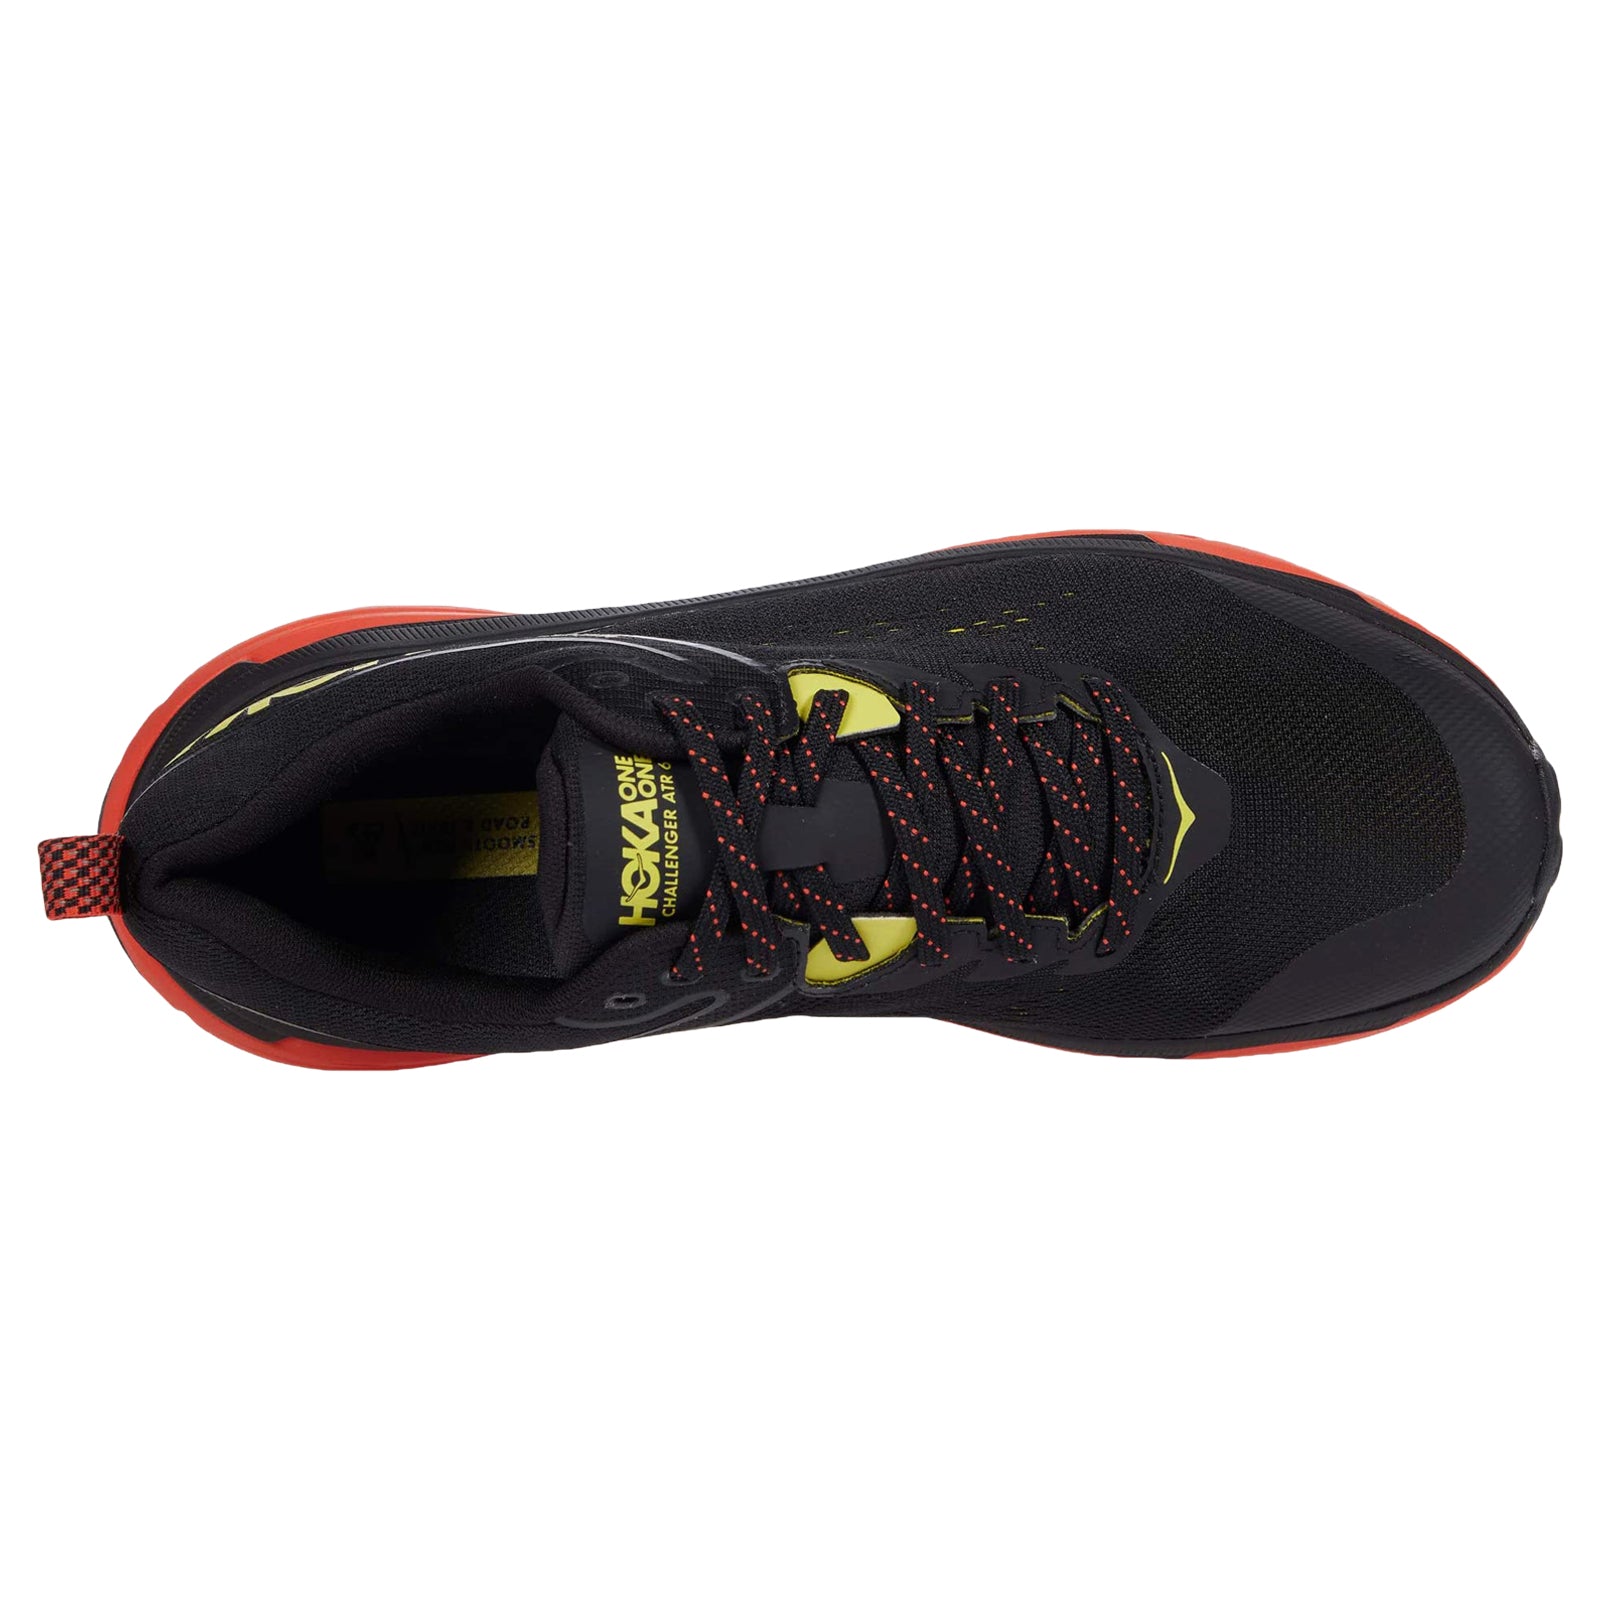 Hoka One One Challenger ATR 6 GTX Synthetic Textile Men's Low-Top Hiking Trainers#color_black green sheen